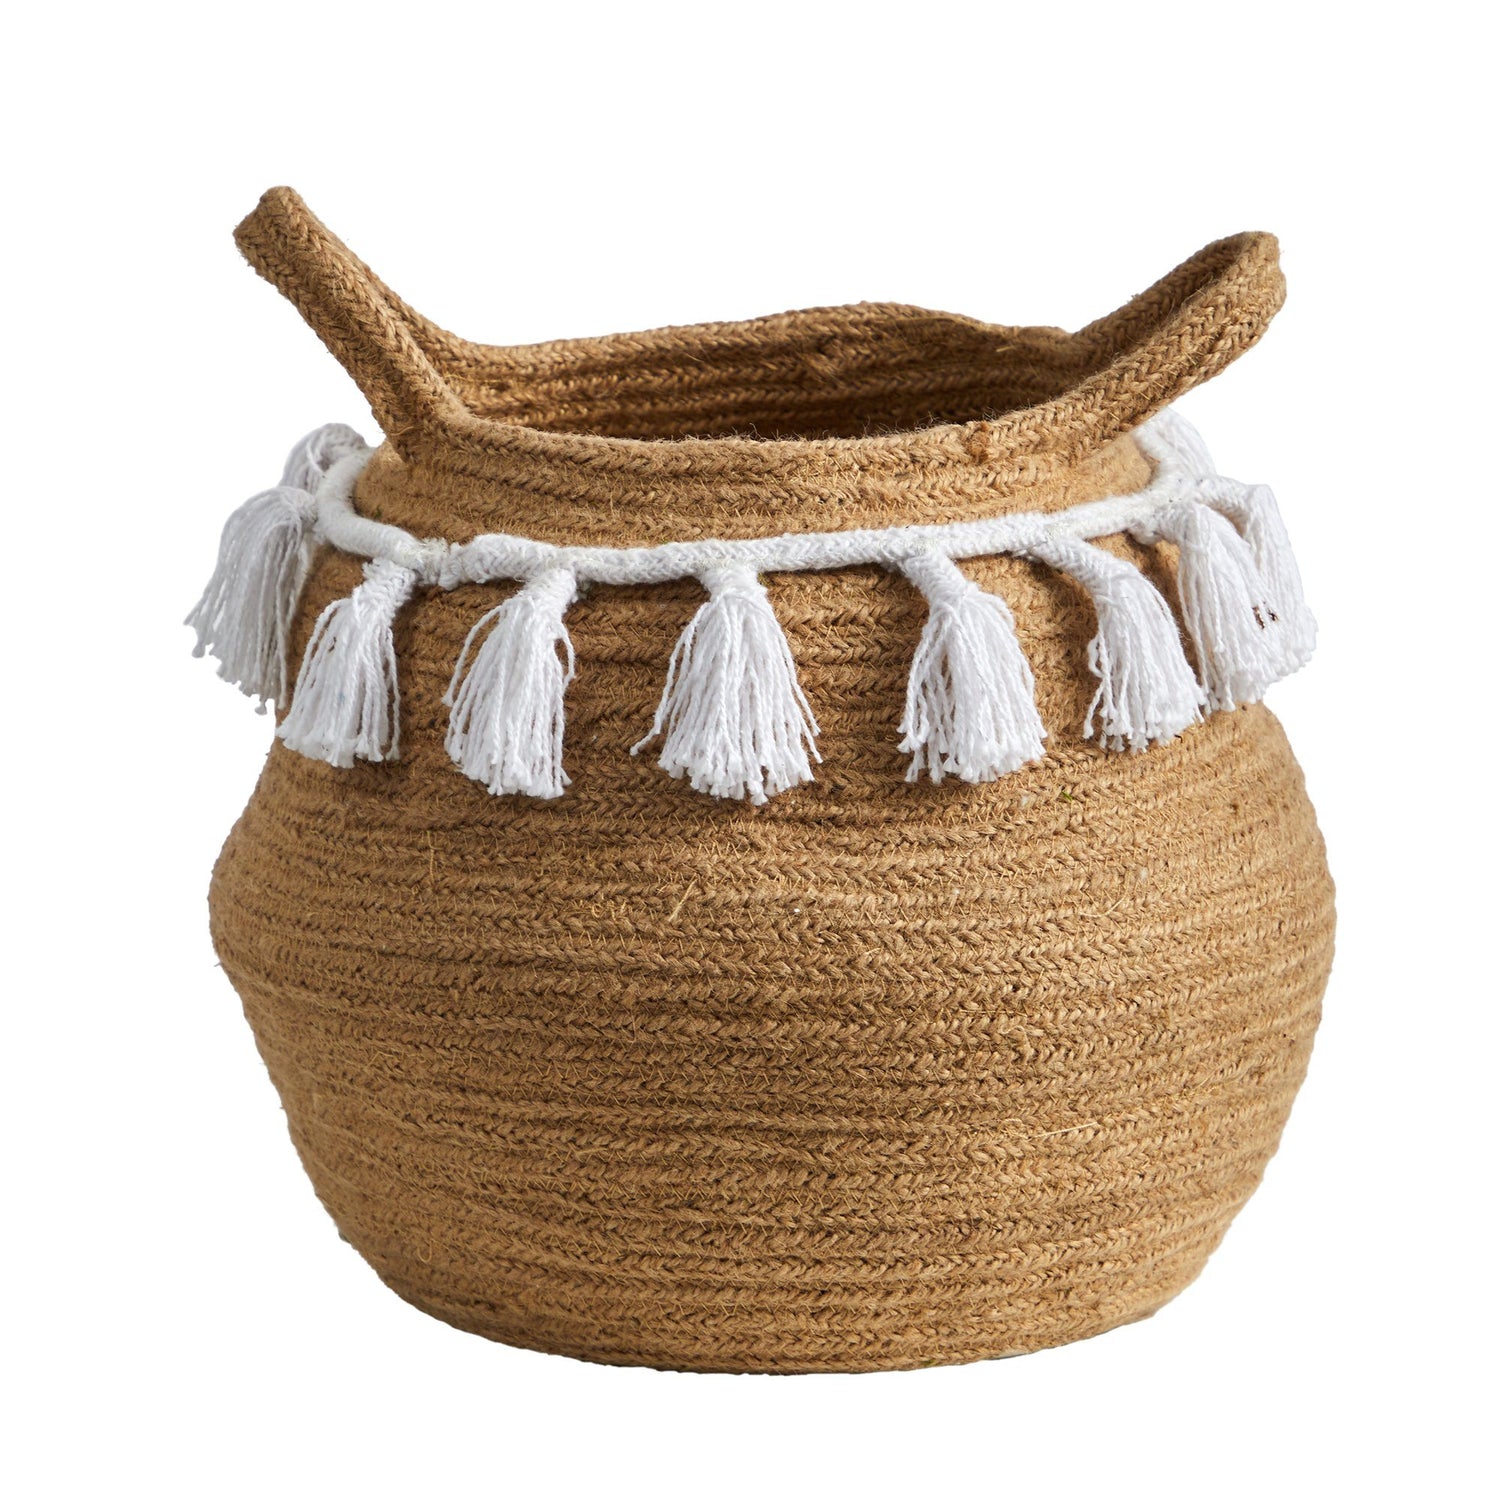 11” Boho Chic Handmade Natural Cotton Woven  Planter with Tassels